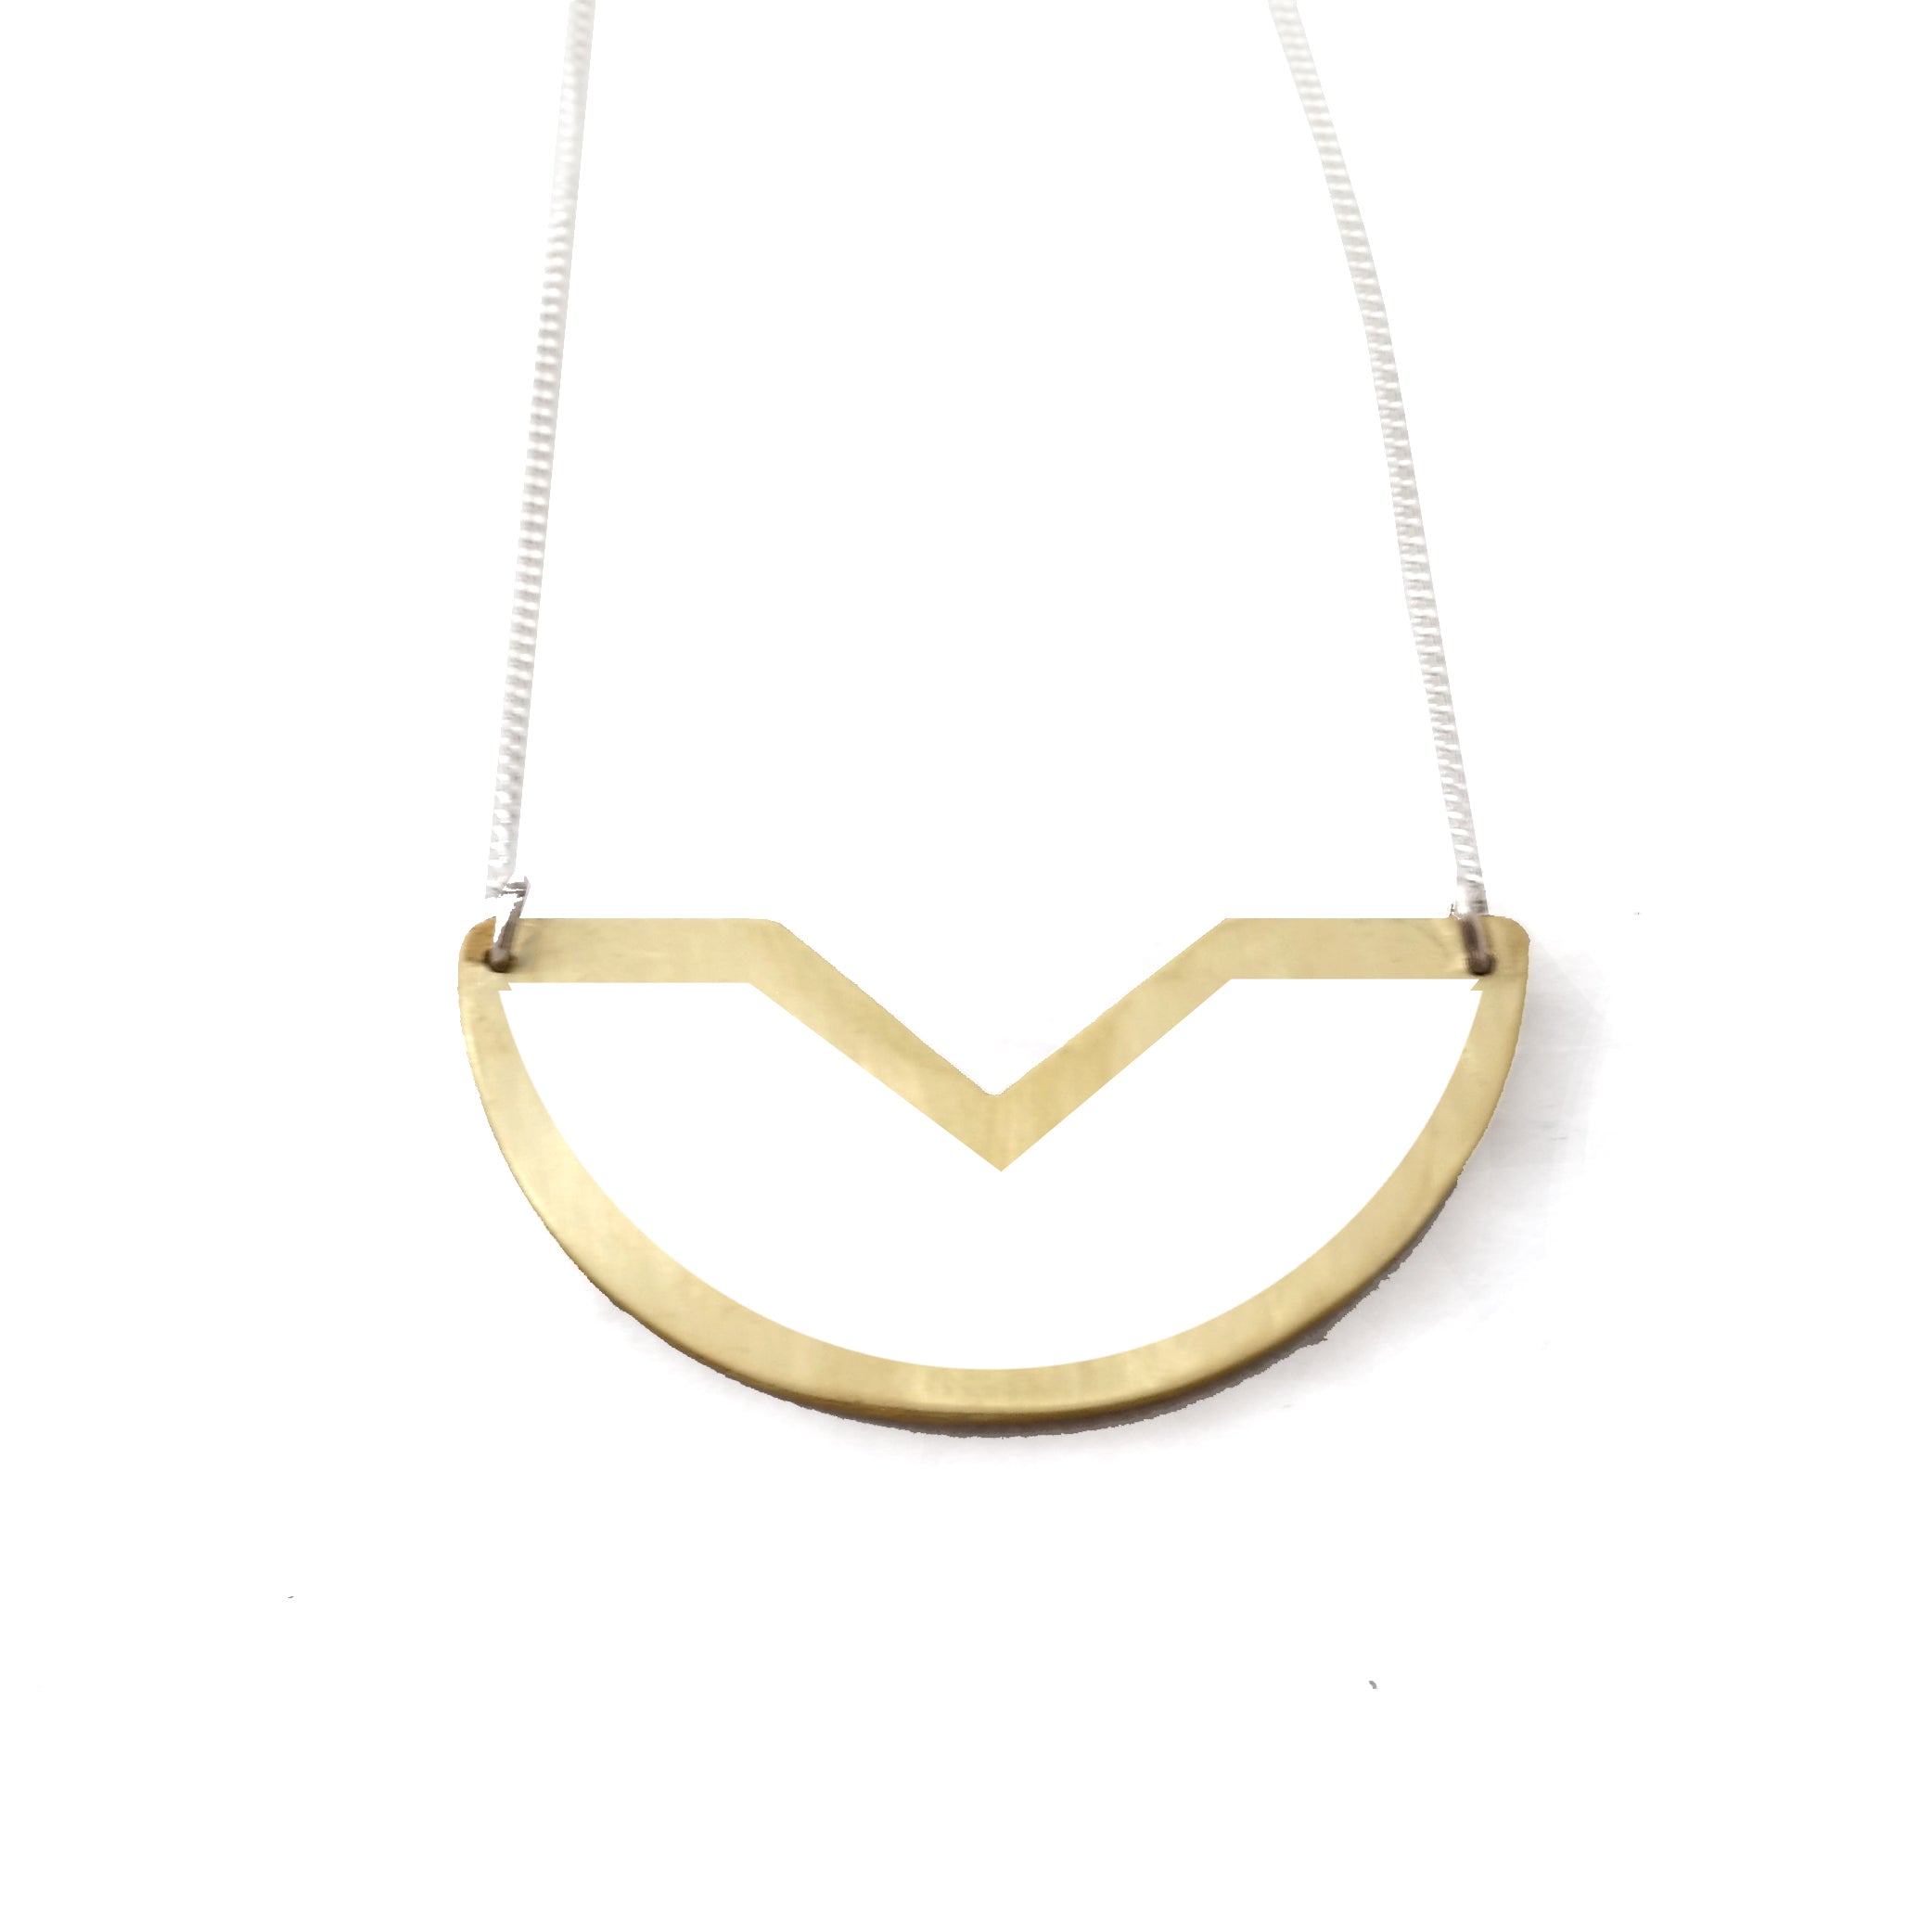 Fawo outline necklace